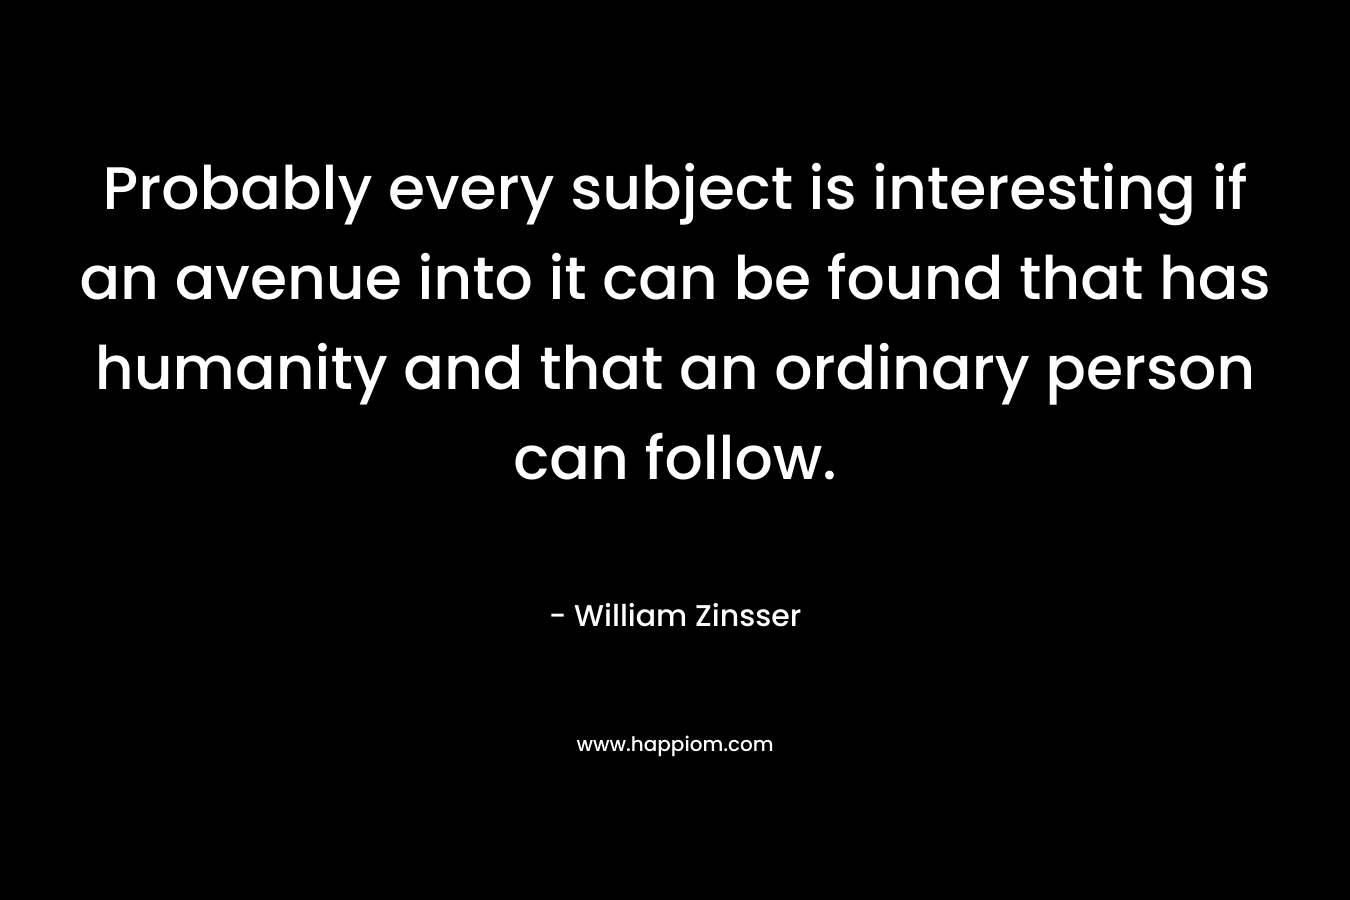 Probably every subject is interesting if an avenue into it can be found that has humanity and that an ordinary person can follow. – William Zinsser